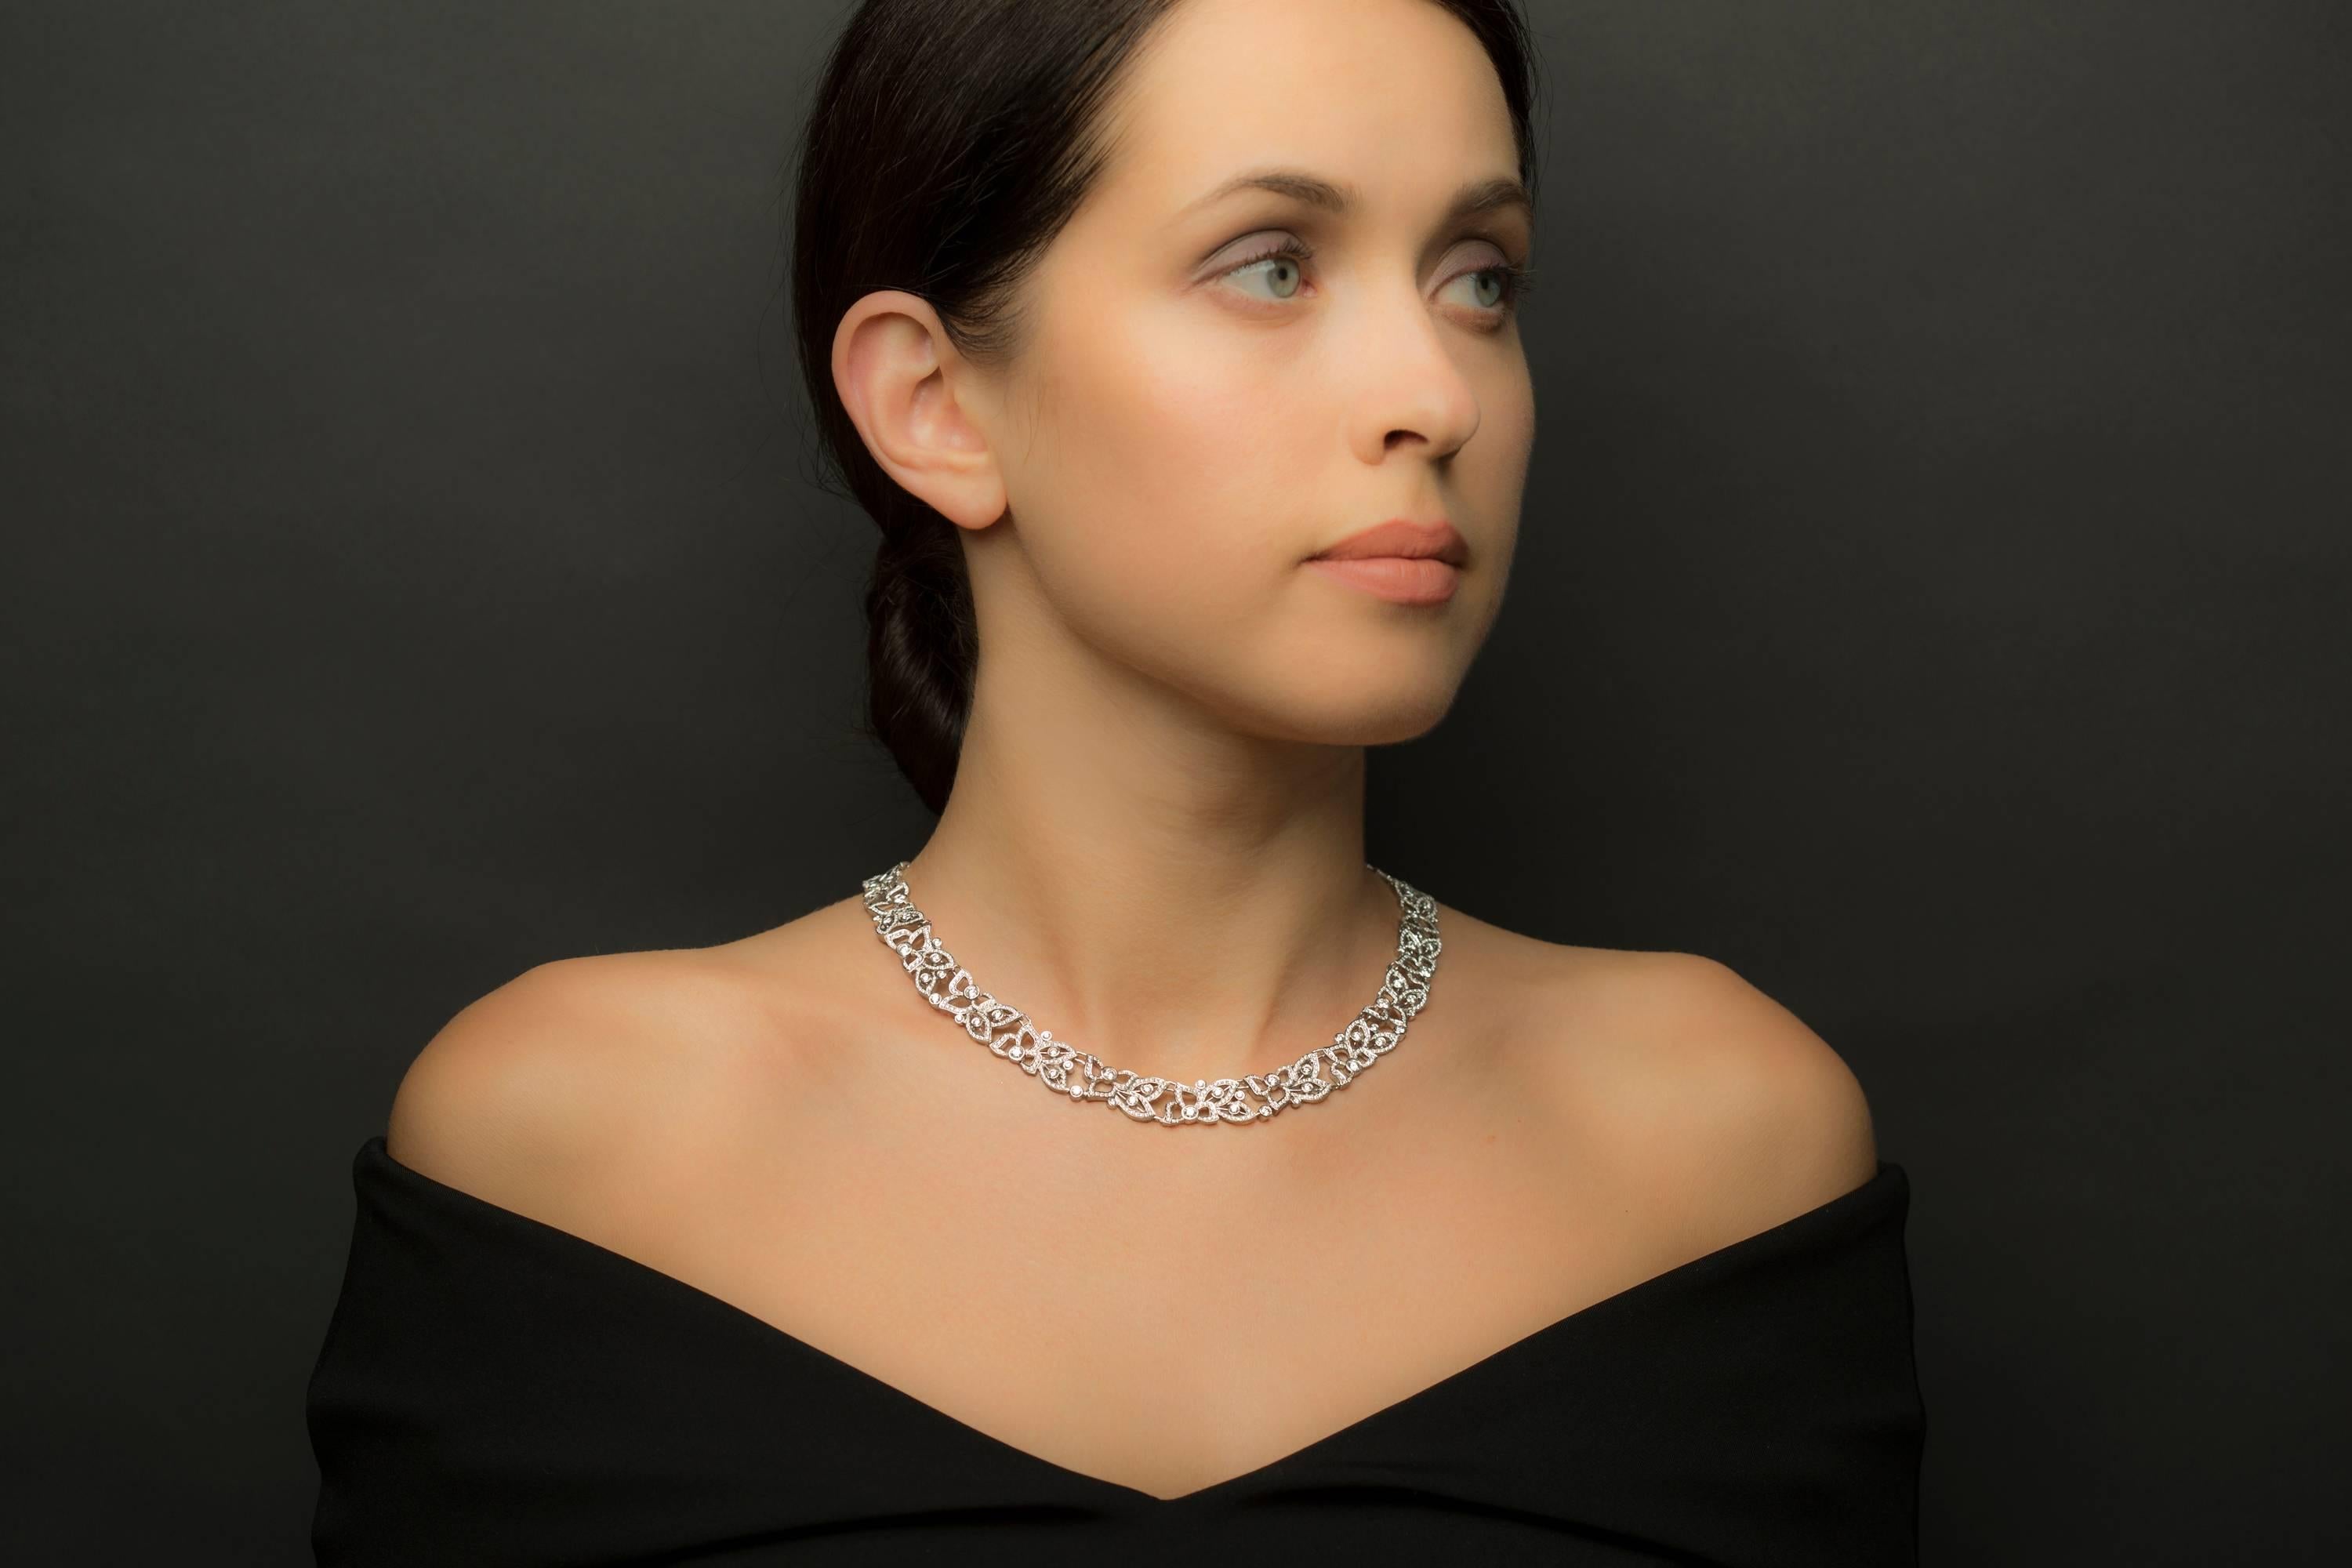 Reaching a new level of complexity and craftsmanship, this piece showcases the entire year Carelle's skilled artisans worked to perfect its form, fit and scale.  This 18 karat white gold floral garland collar necklace features a whopping 8.5 carats